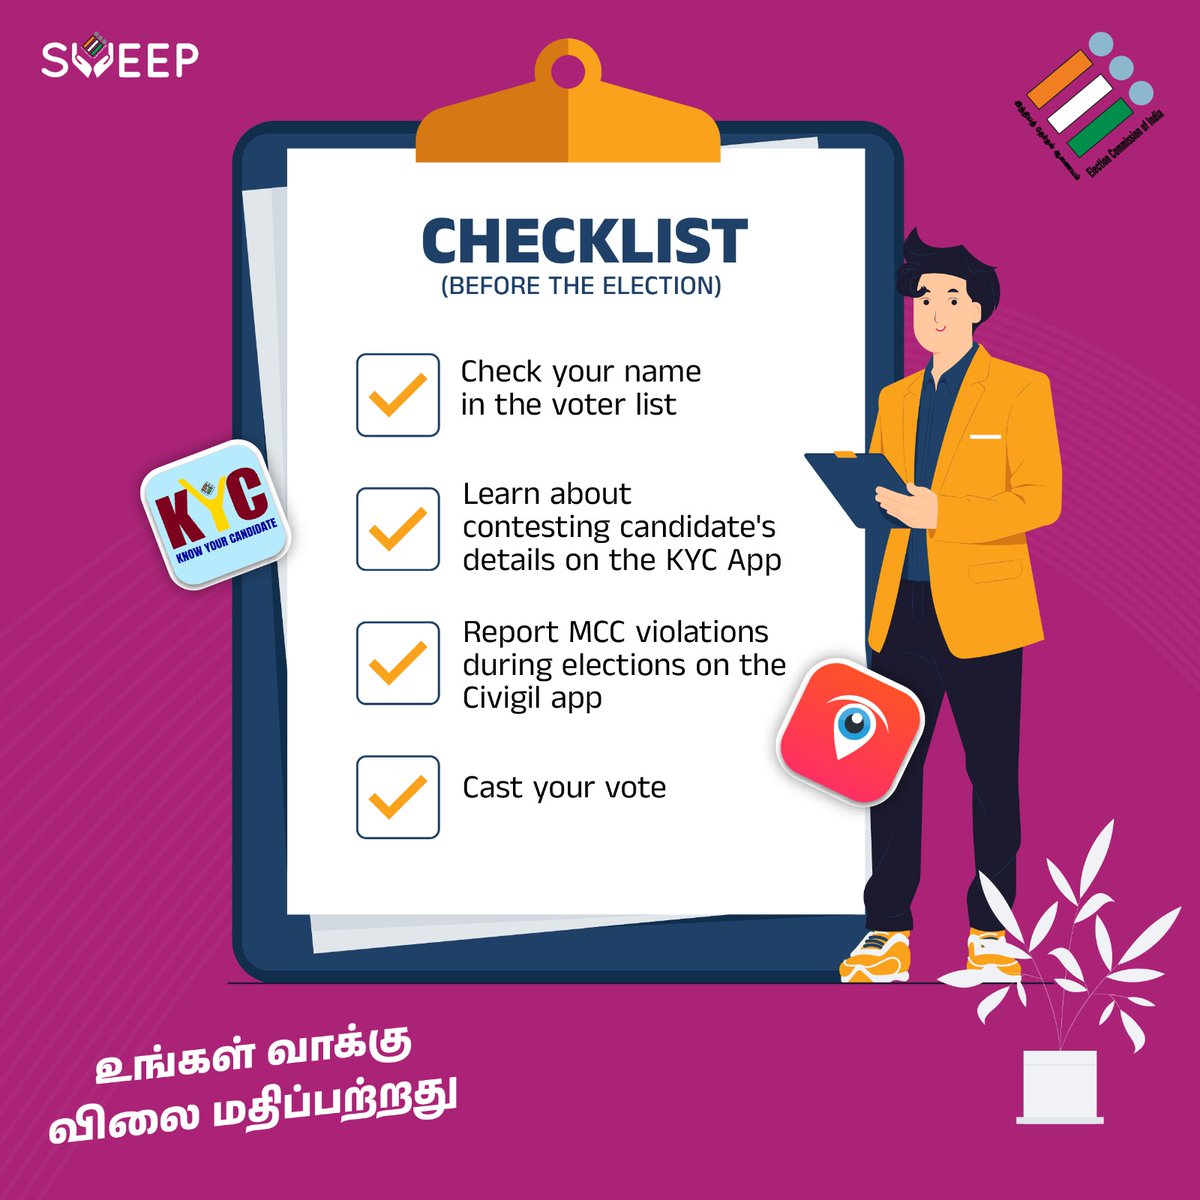 Checklist for the upcoming election.

#SVEEP #MyFirstVoteForCountry
#ChiefElectoralOfficer_TamilNadu
#LoksabhaElection2024 #TNelection2024
#VoteIndia #Election2024 #BeAVoter #YourVoteMatters #ElectionEngagement #DemocracyMatters #ElectionCommisionOfIndia